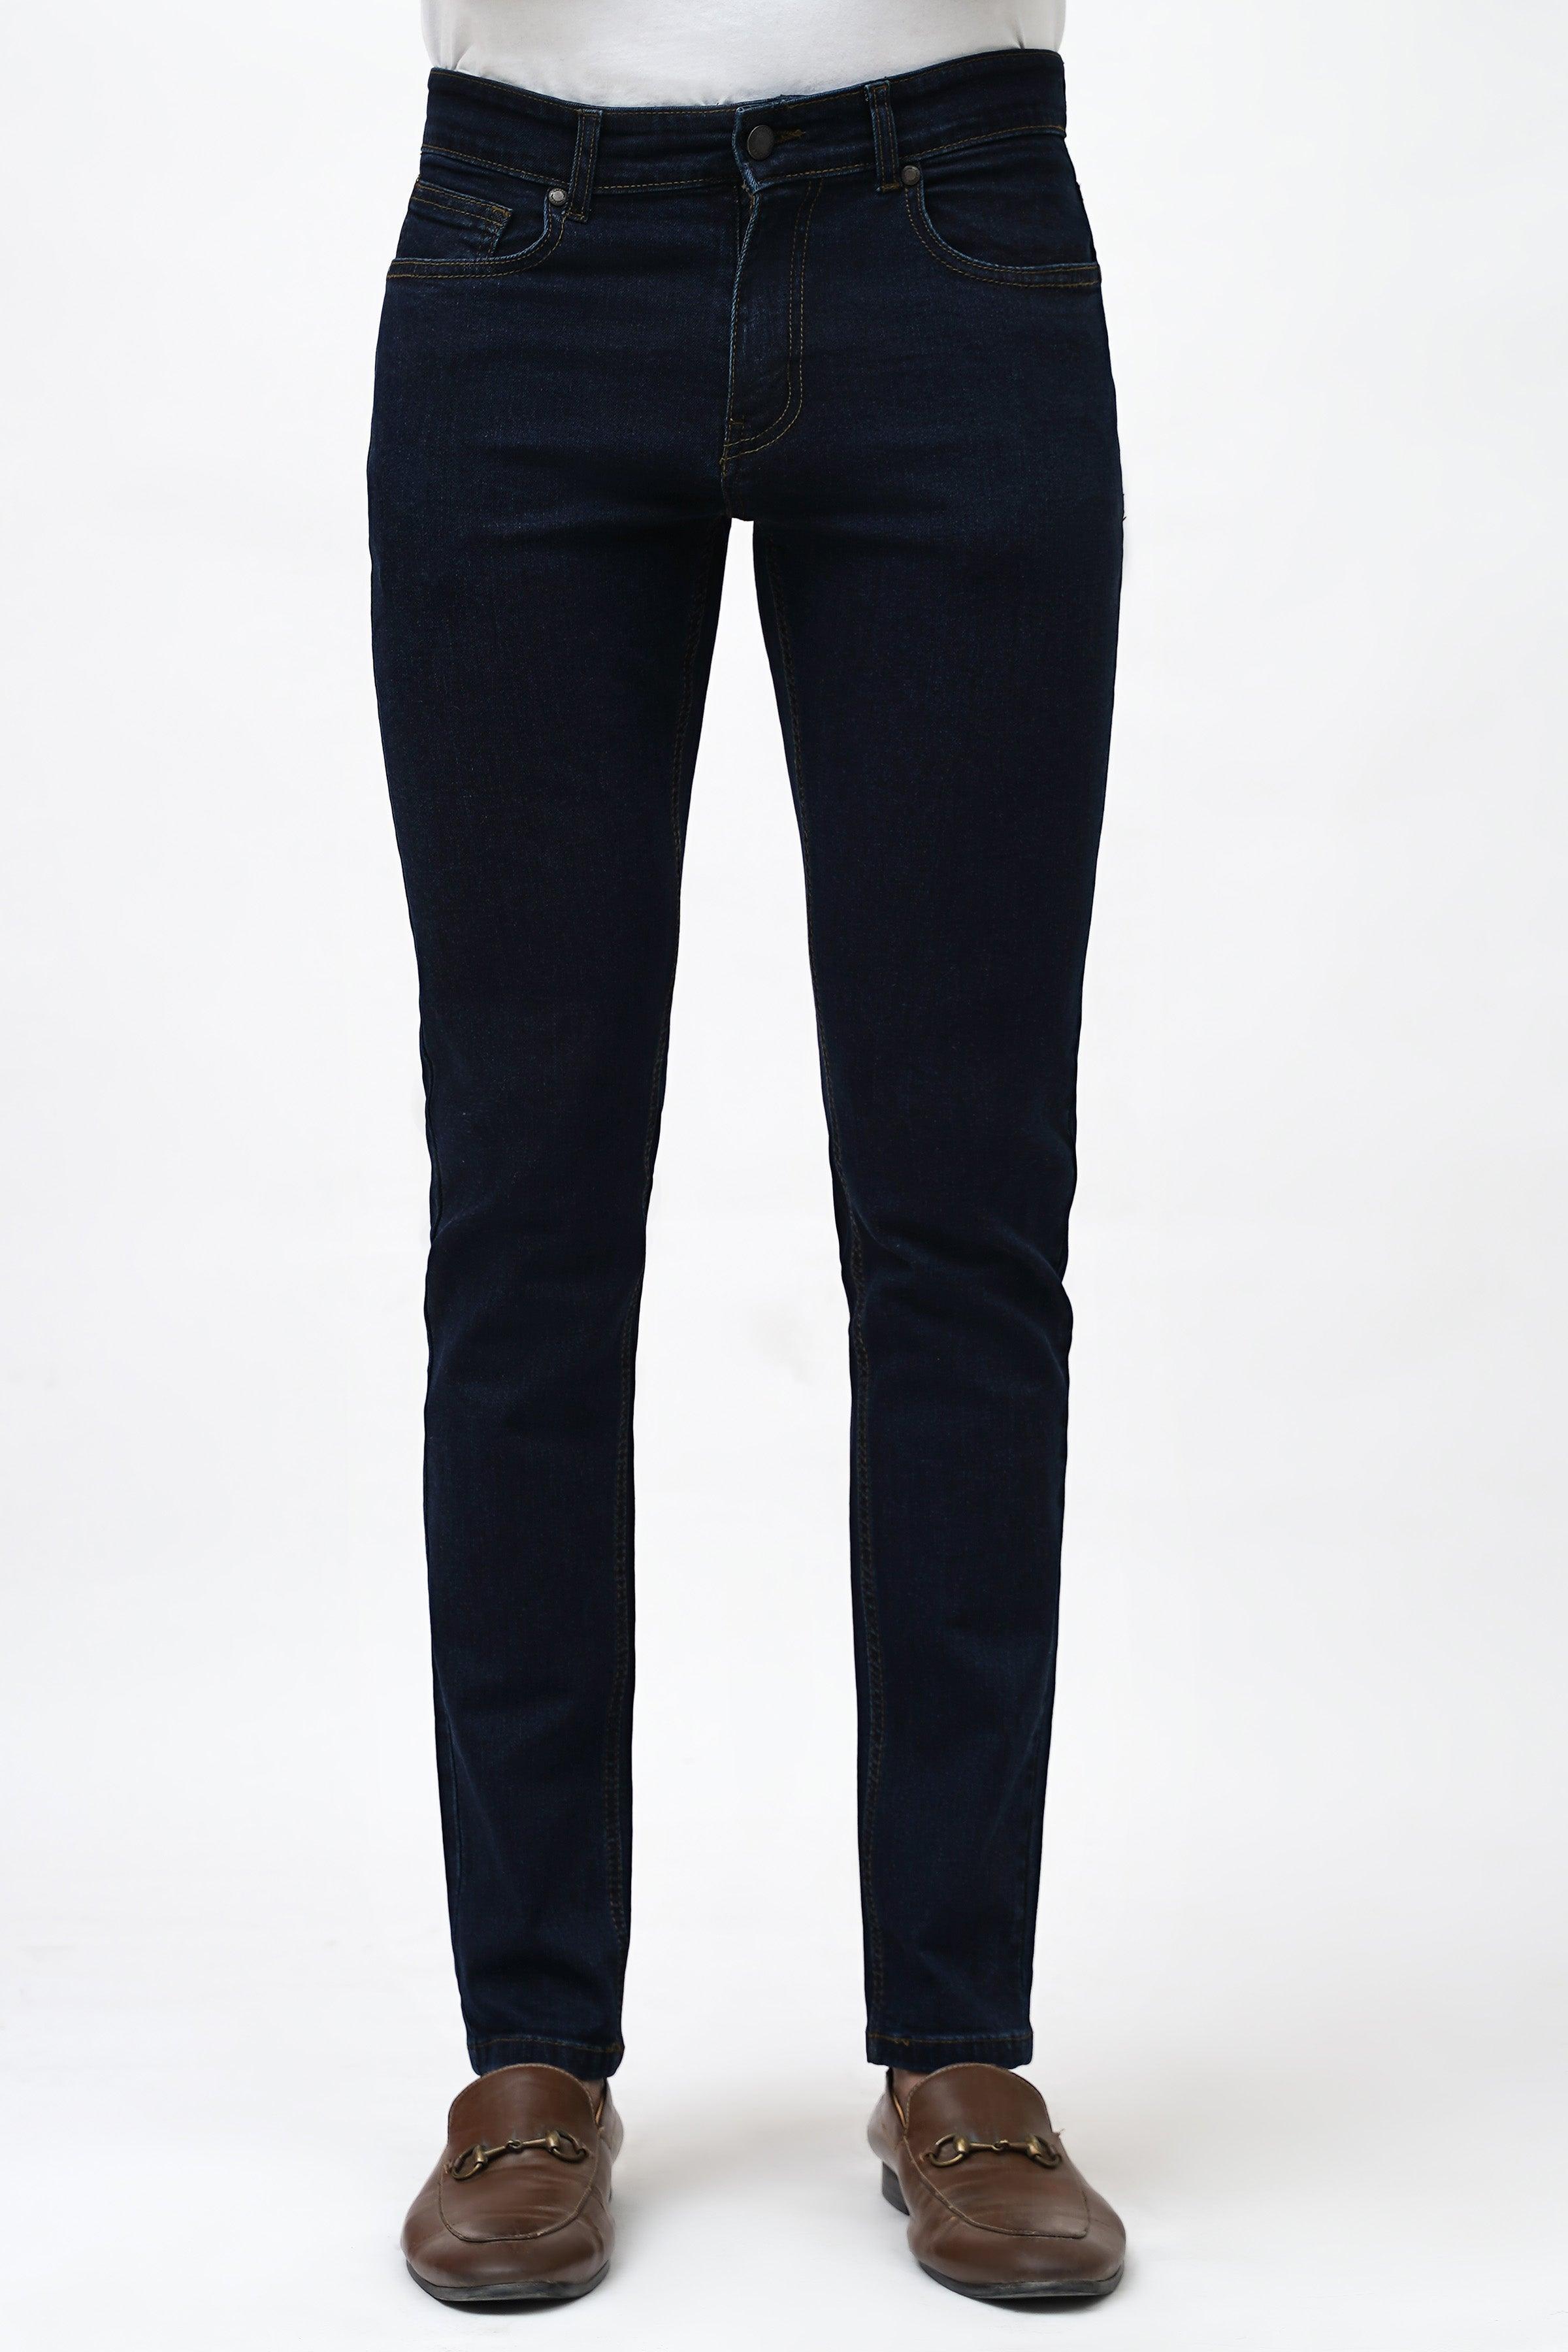 SLIM FIT NAVY BLUE DENIM JEAN at Charcoal Clothing